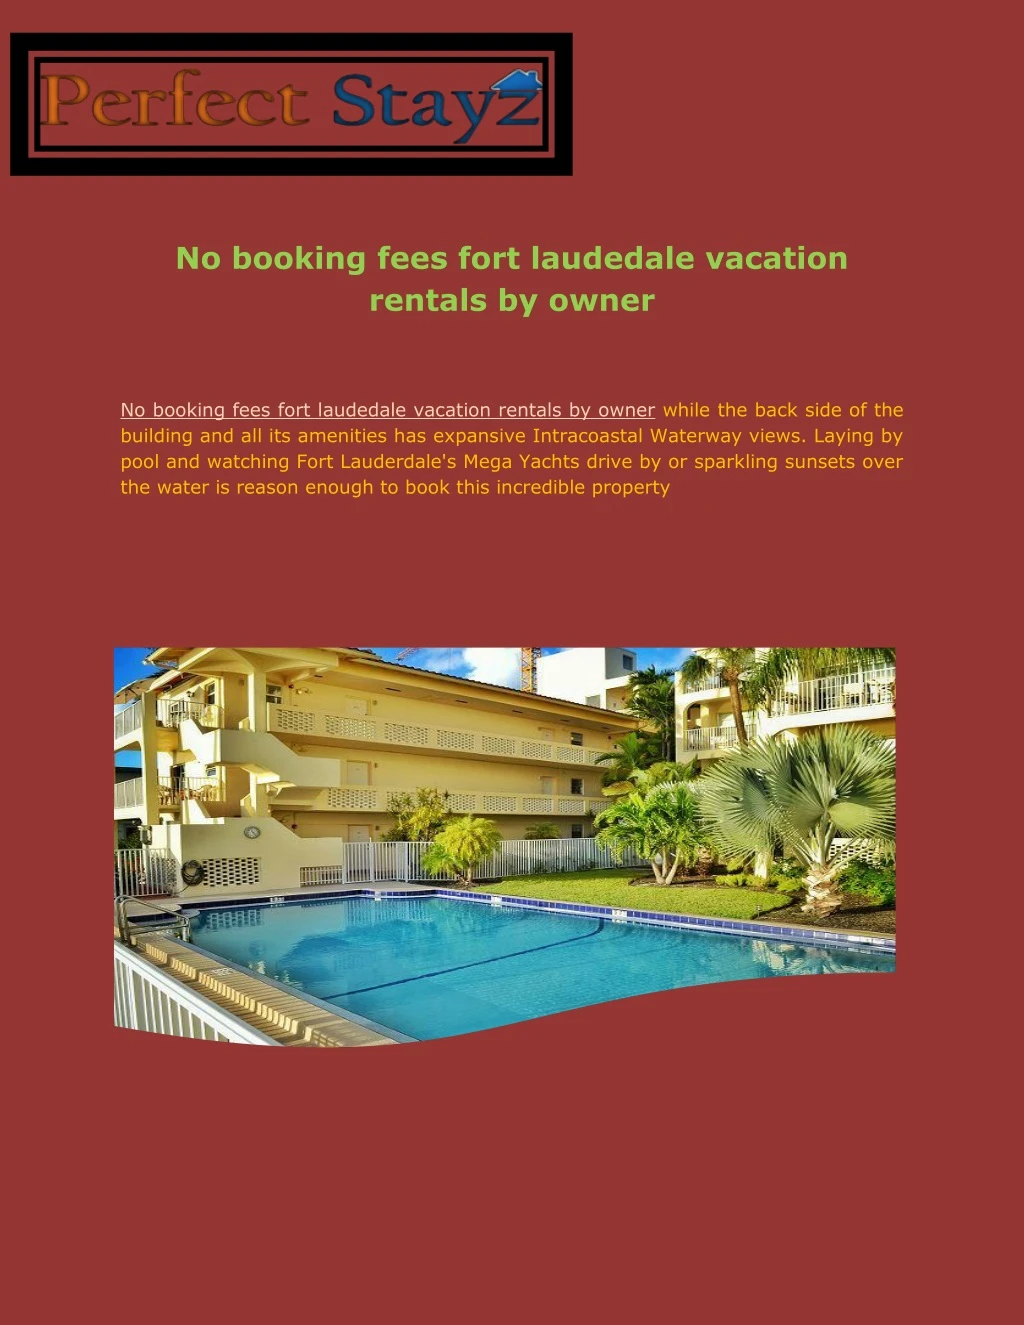 no booking fees fort laudedale vacation rentals